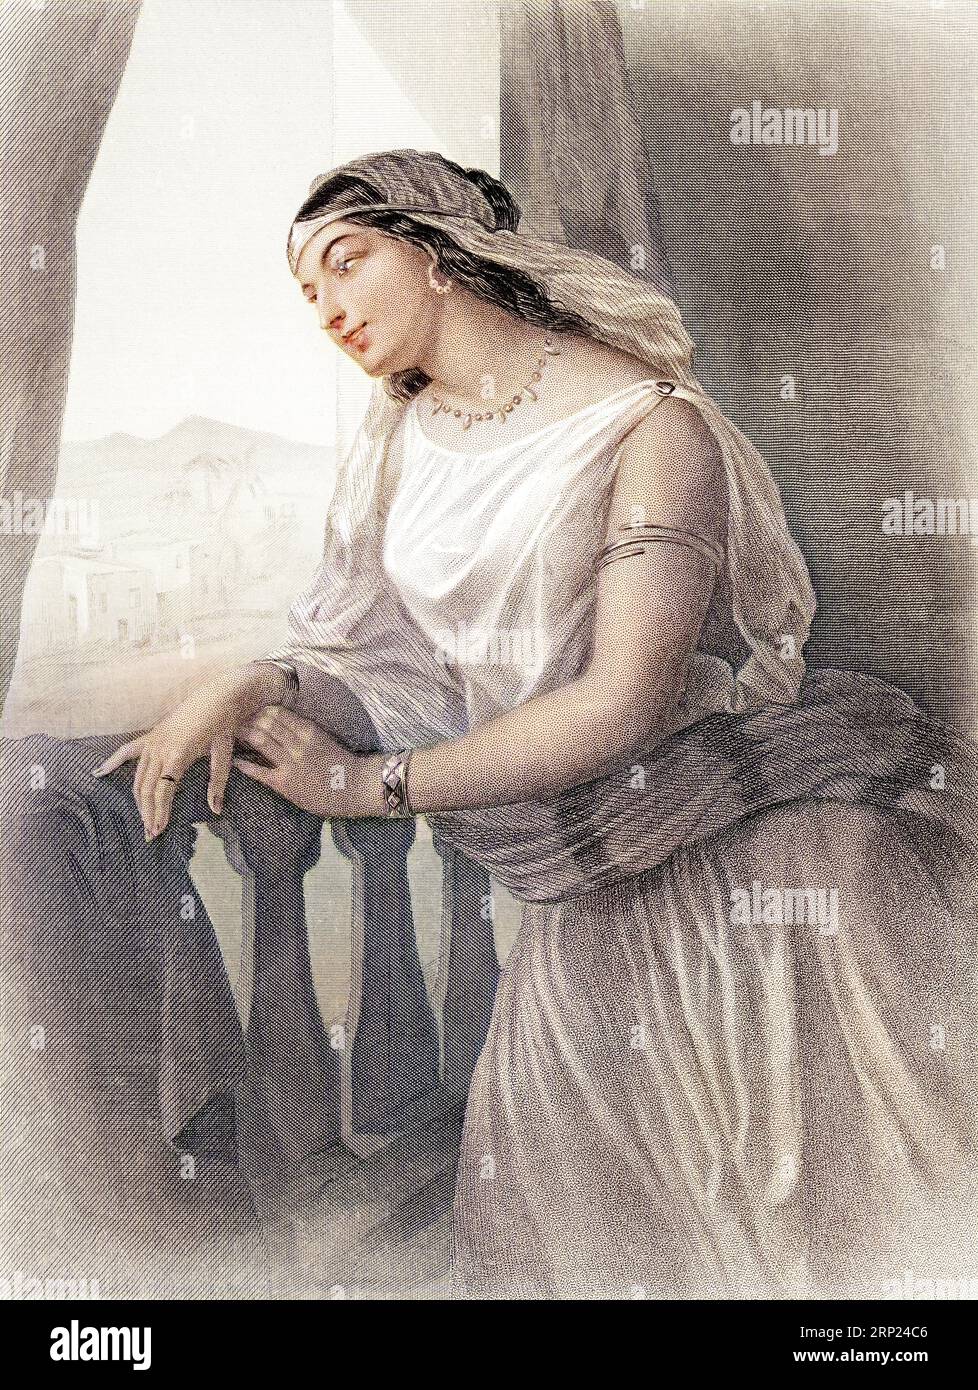 Michal, daughter of King Saul, was the wife of King David, her mother was Ahinoam. Michal saved David's life by lifting him out of a window and giving him time to escape. Old 19th century engraved colored illustration from Mugeres de la Biblia by Joaquin Roca y Cornet 1862 Stock Photo